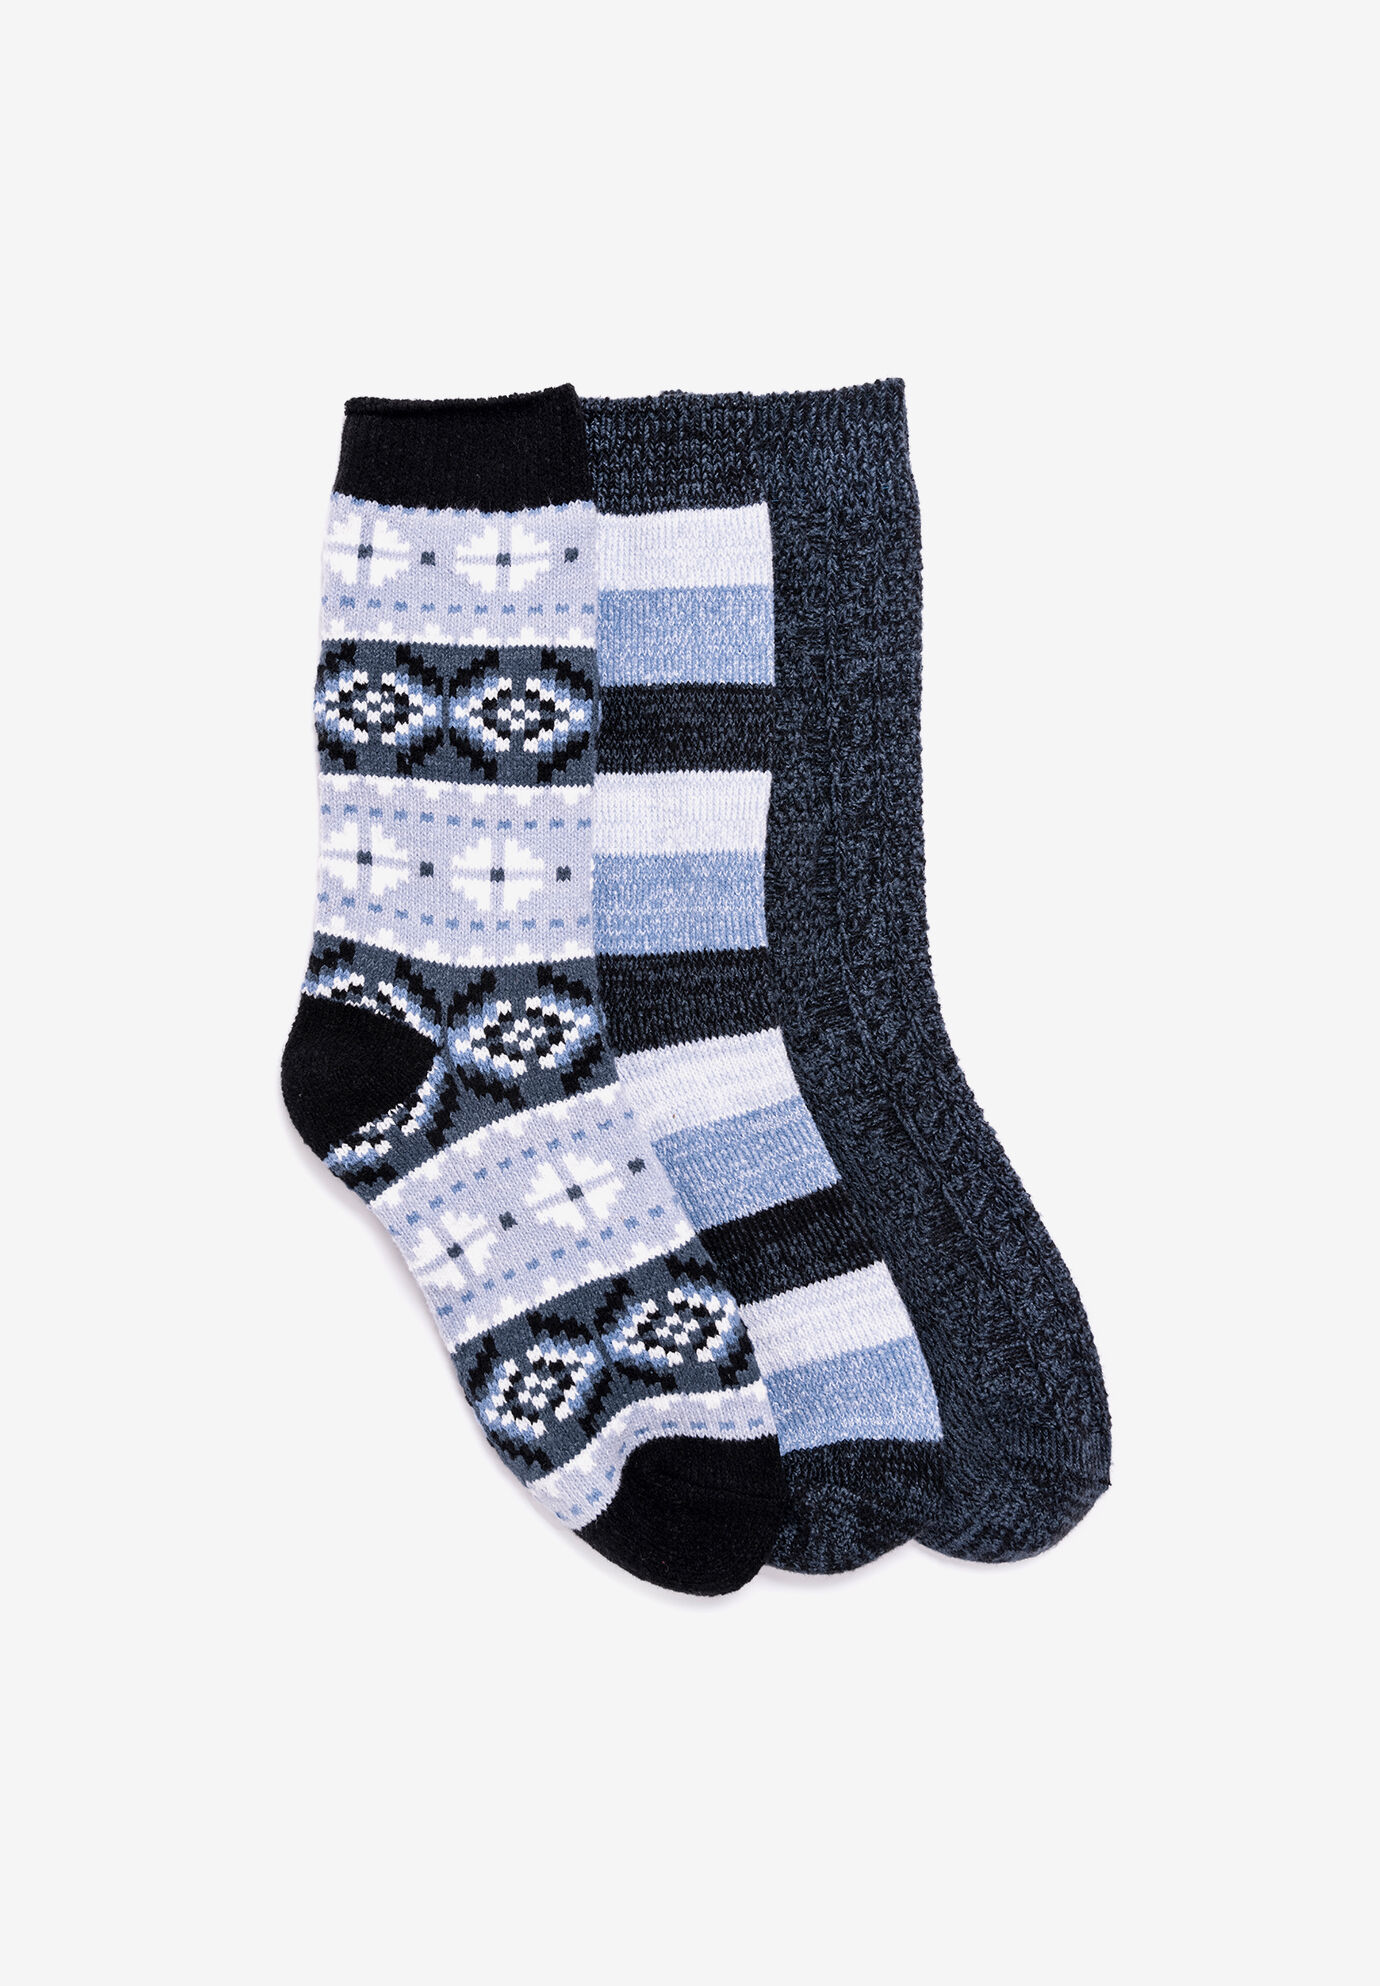 Women's 3 Pair Pack Boot Socks by MUK LUKS in Moody Blue (Size ONE)